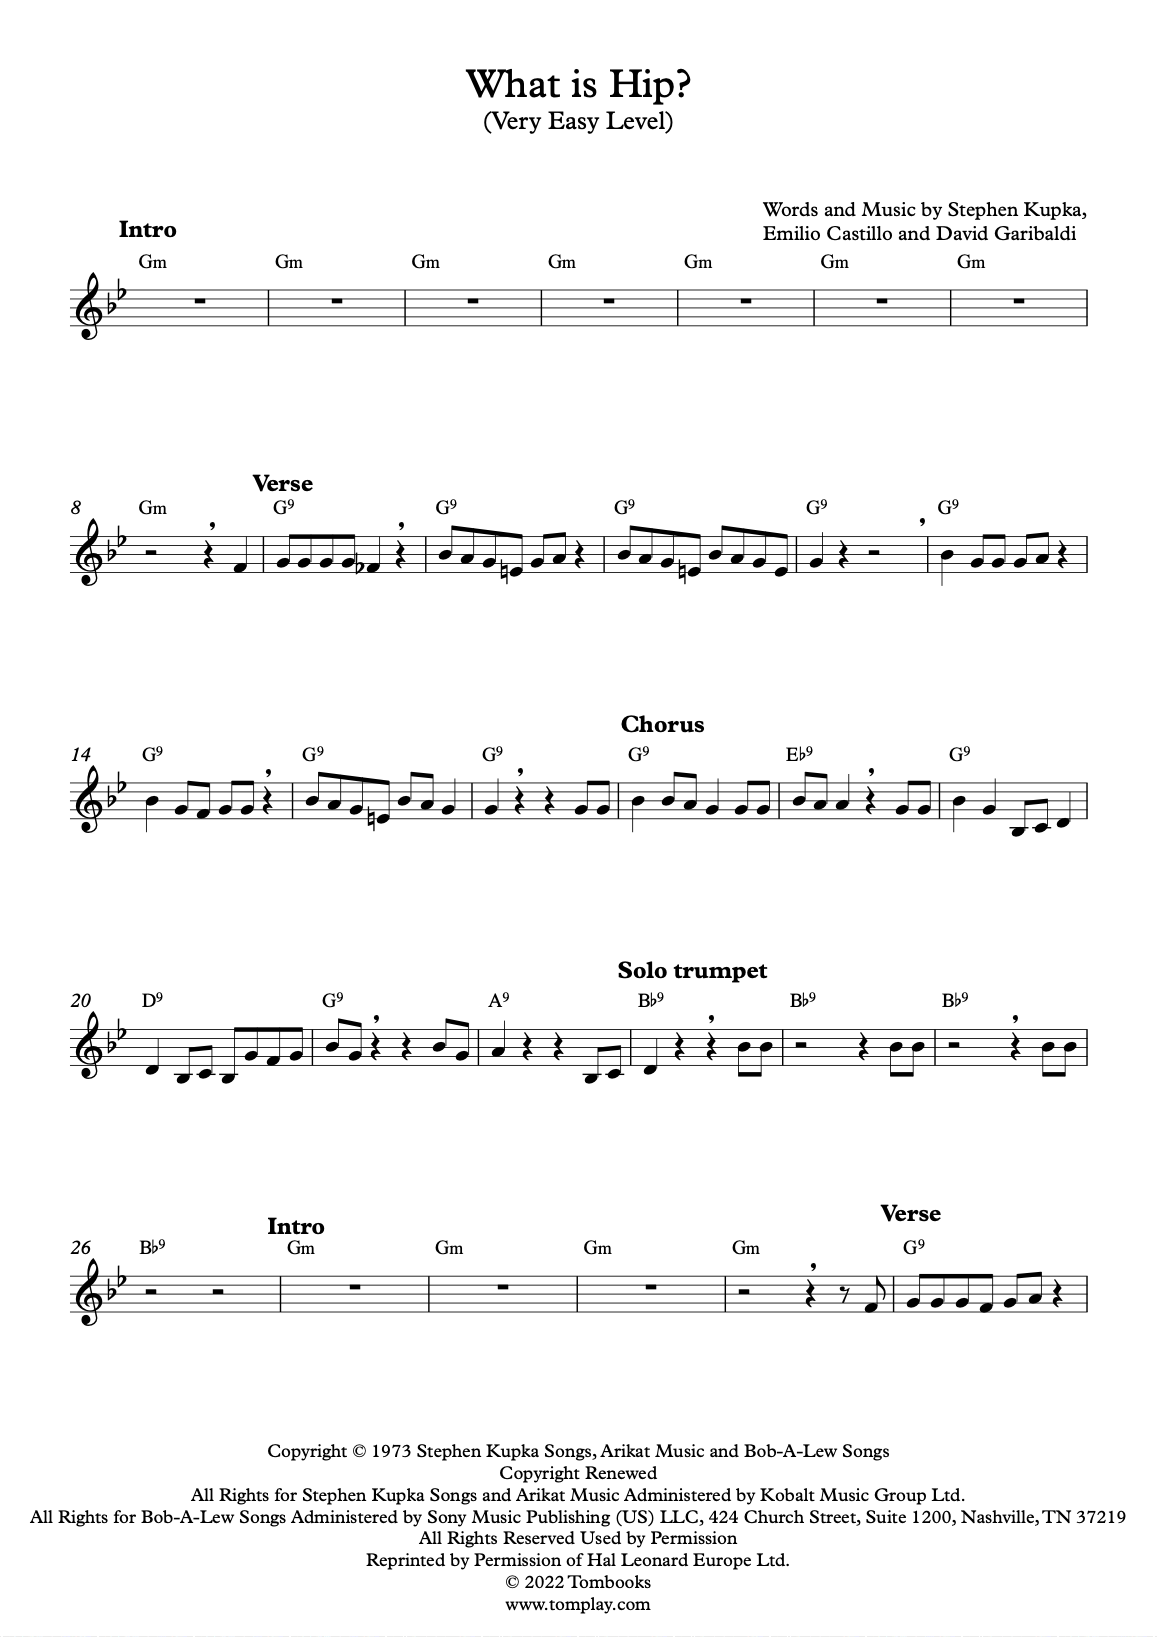 What is Hip? (Very Easy Level) (Tower of Power) - Trumpet Sheet Music